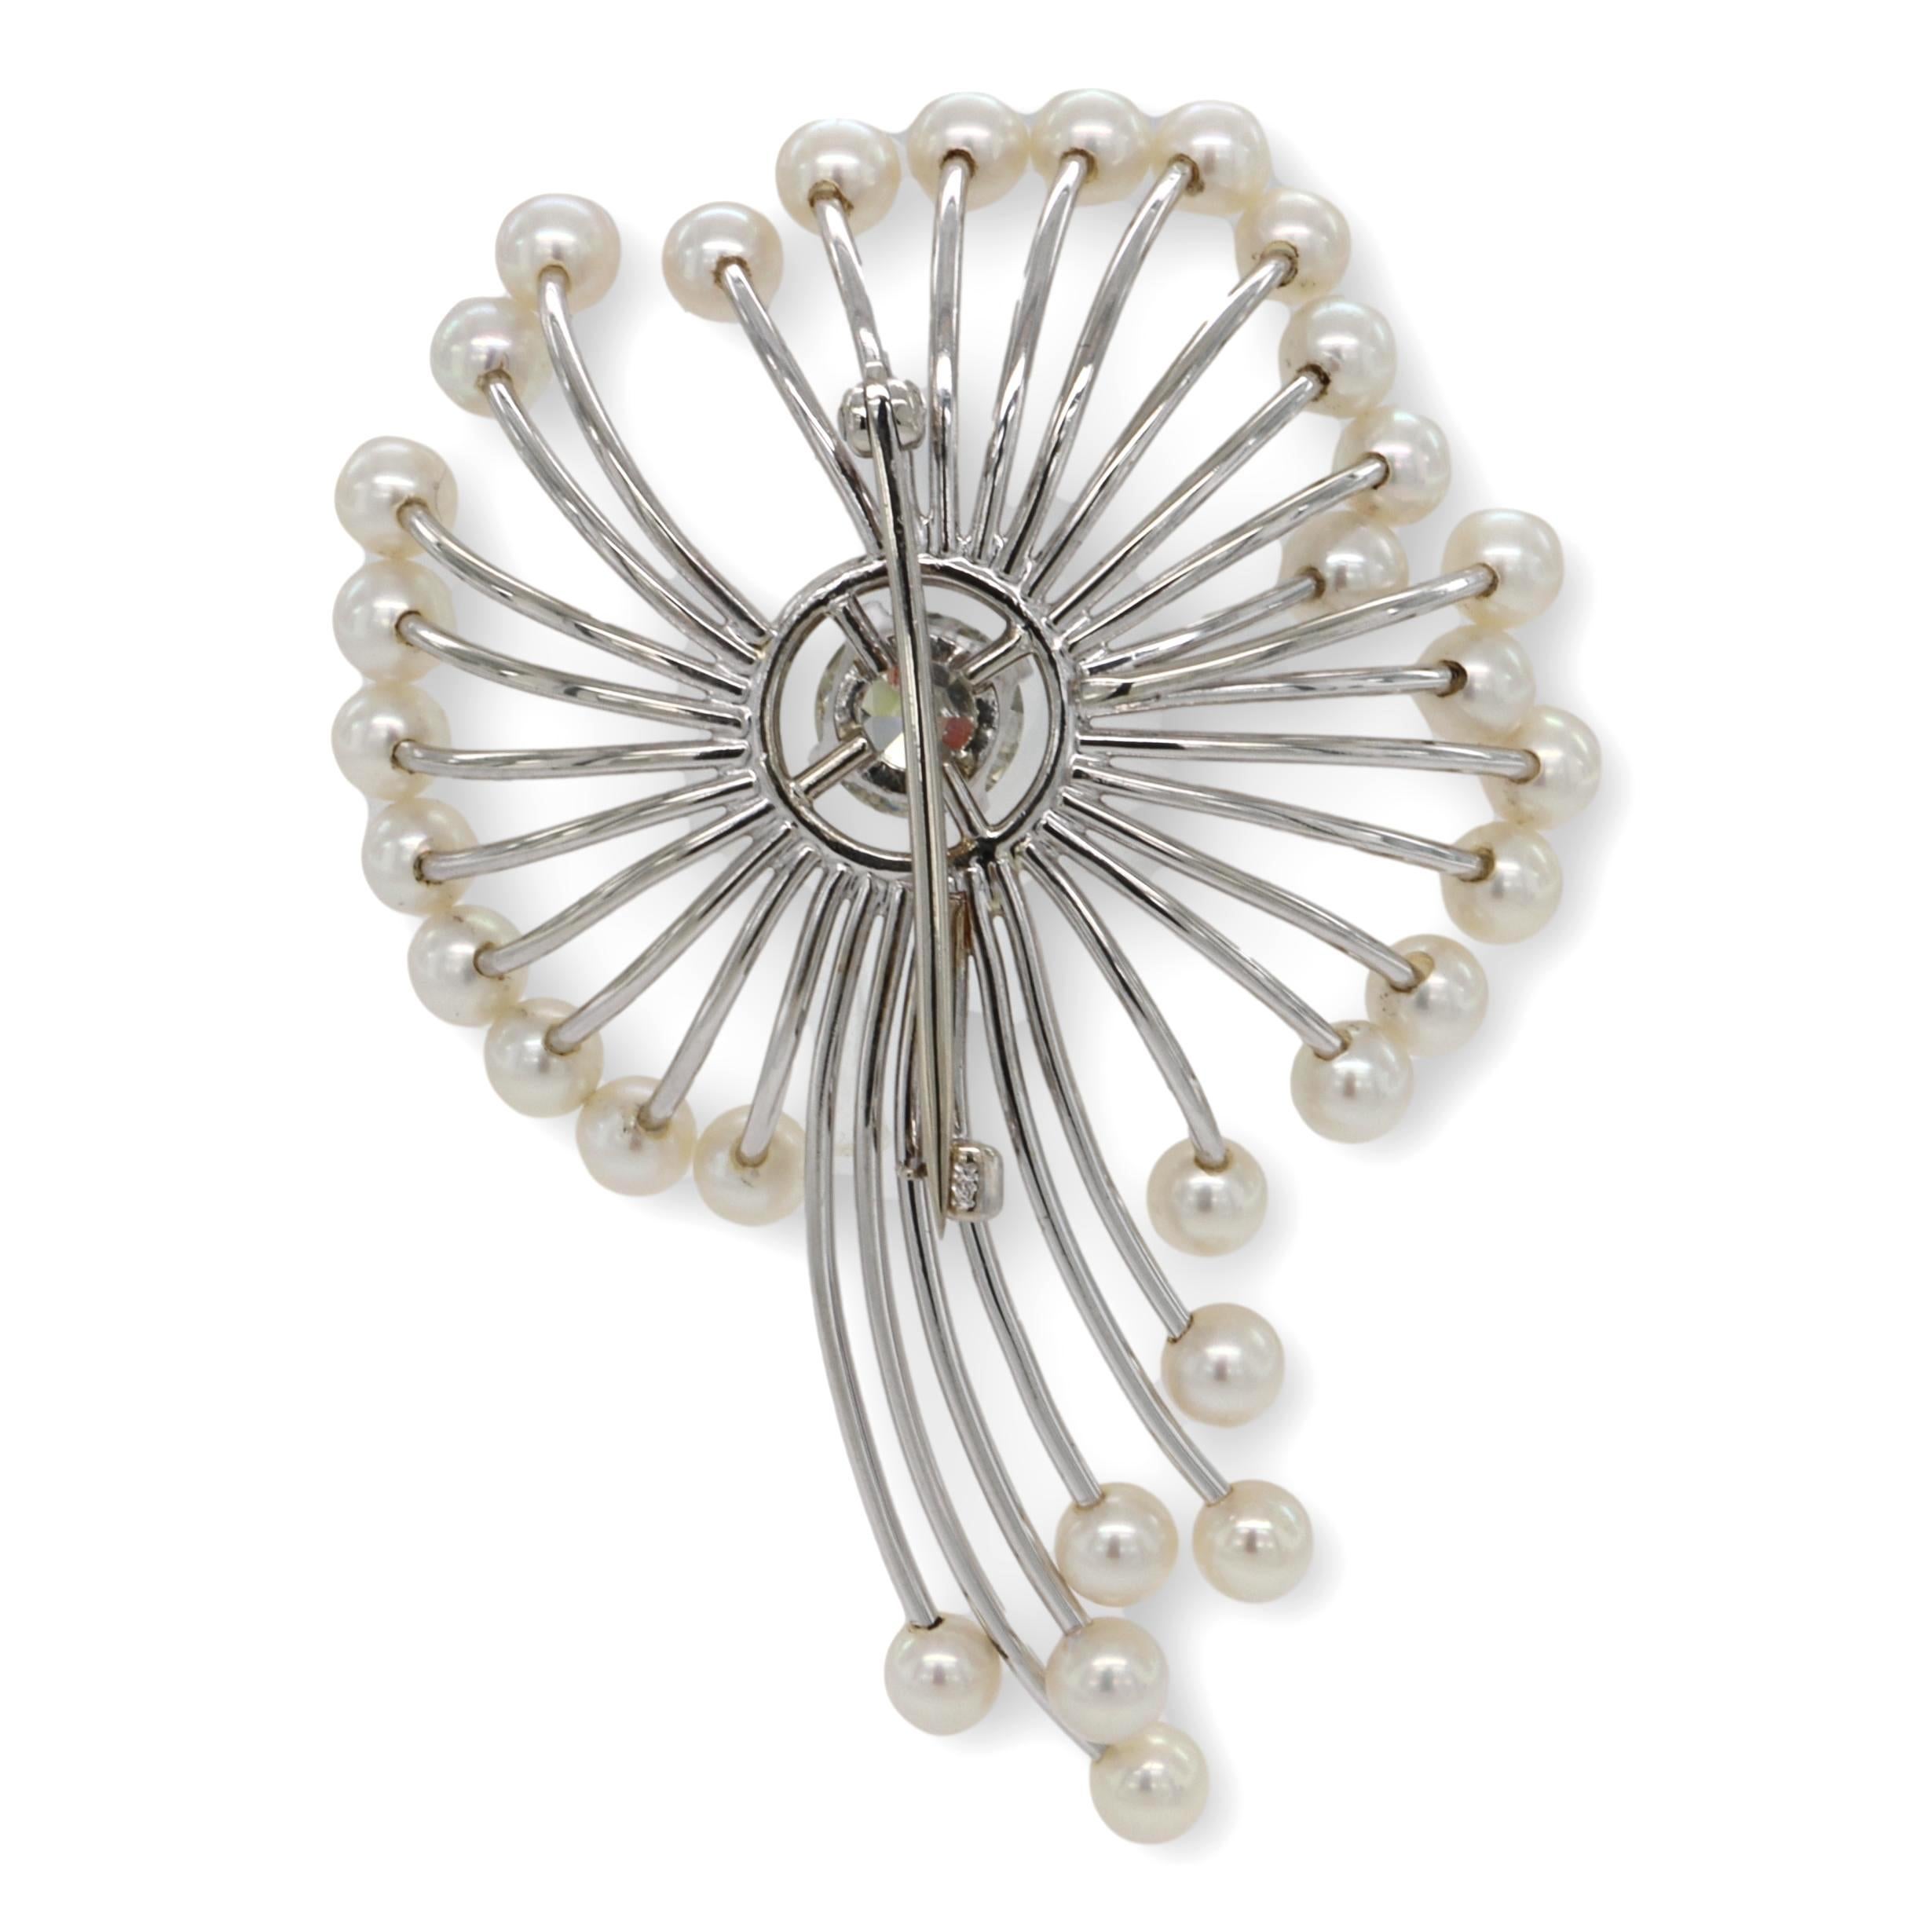 Retro Vintage 14K White Gold 1.25ct. Old-European Diamond Akoya Seed Pearl Brooch/Pin For Sale